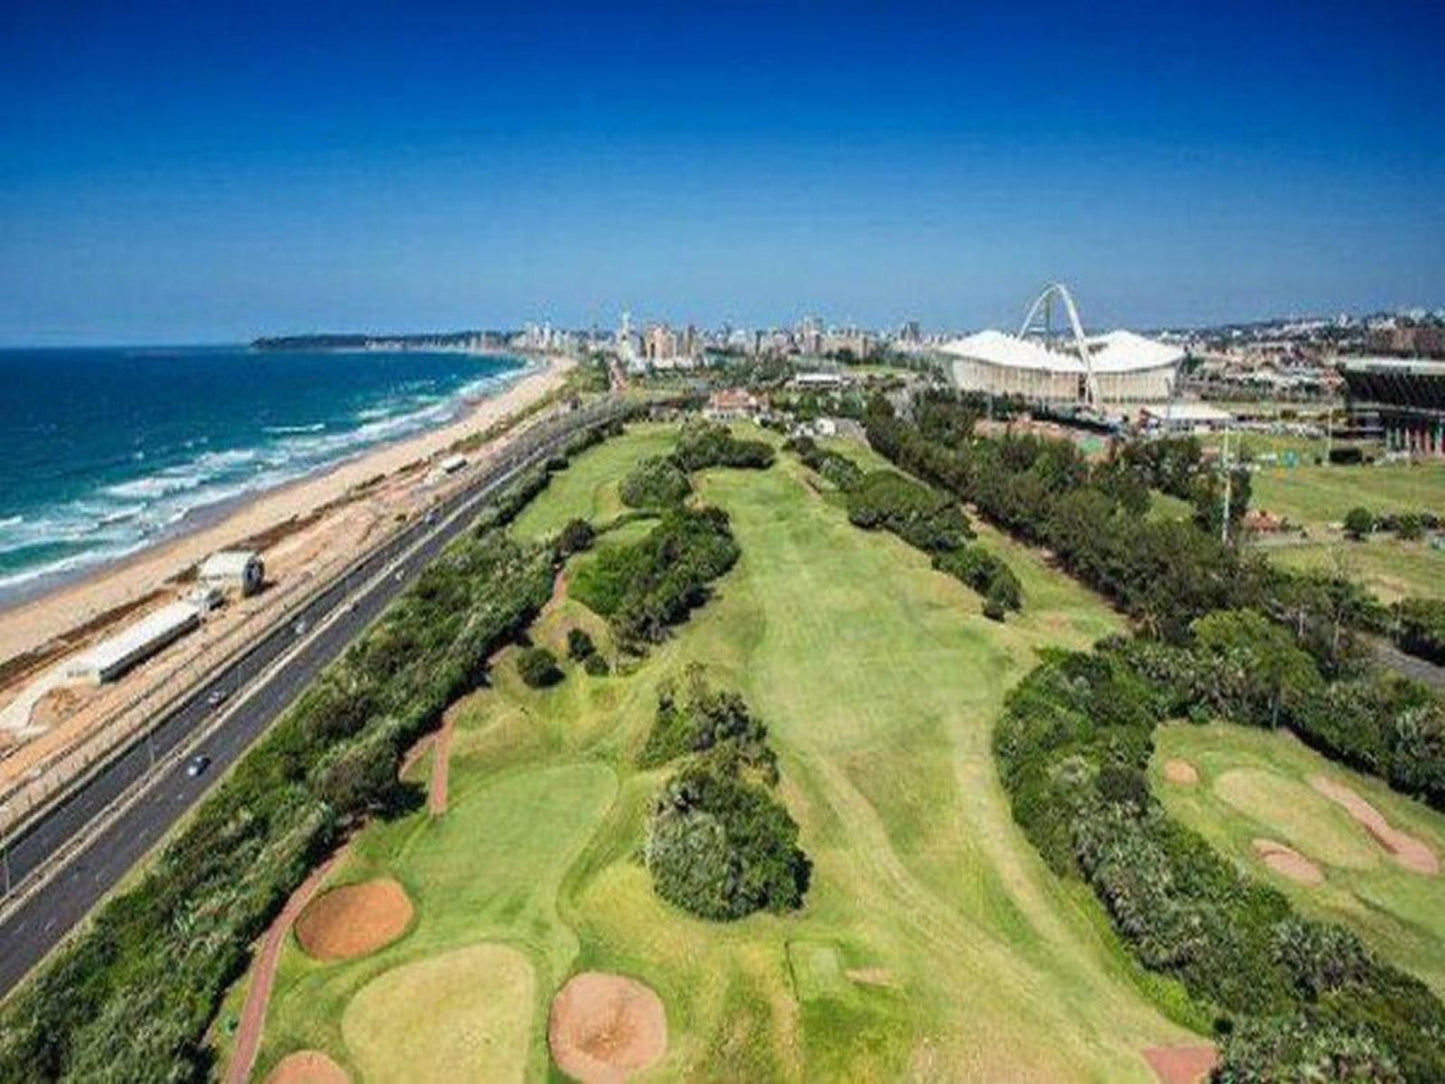 14 On Braemar La Lucia Umhlanga Kwazulu Natal South Africa Complementary Colors, Beach, Nature, Sand, Ball Game, Sport, Golfing